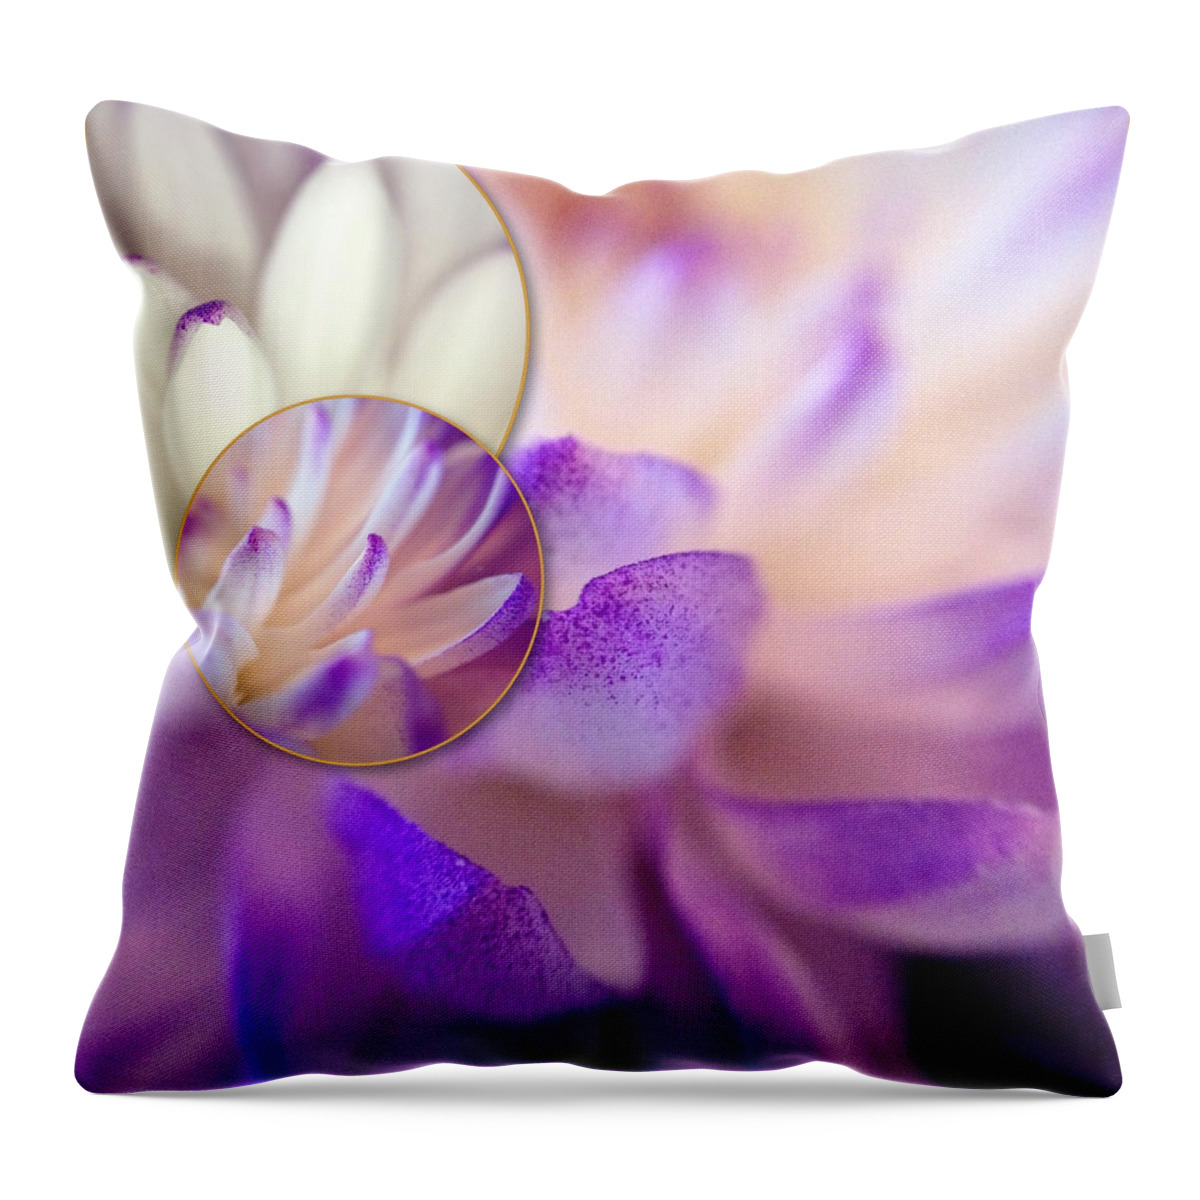 Bees Eye View Throw Pillow featuring the photograph Bee's Eye View by Susan Maxwell Schmidt